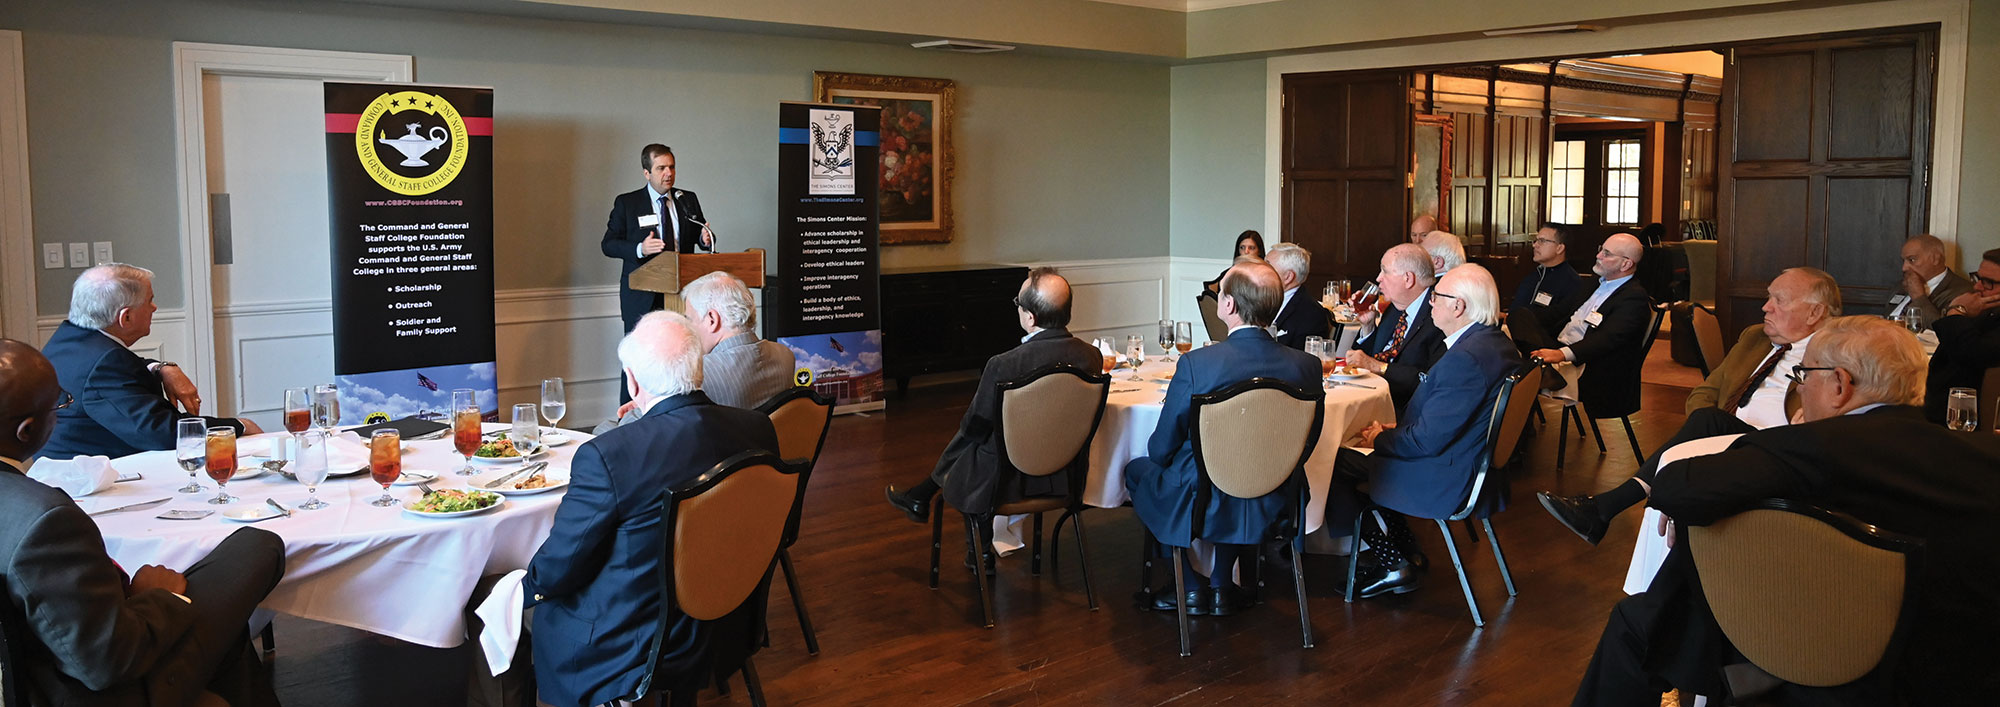 Business reporter and author Christopher Leonard delivers his presentation on the Federal Reserve bank for the Arter-Rowland National Security Forum luncheon event on Oct. 20, 2022, at the Carriage Club in Kansas City.